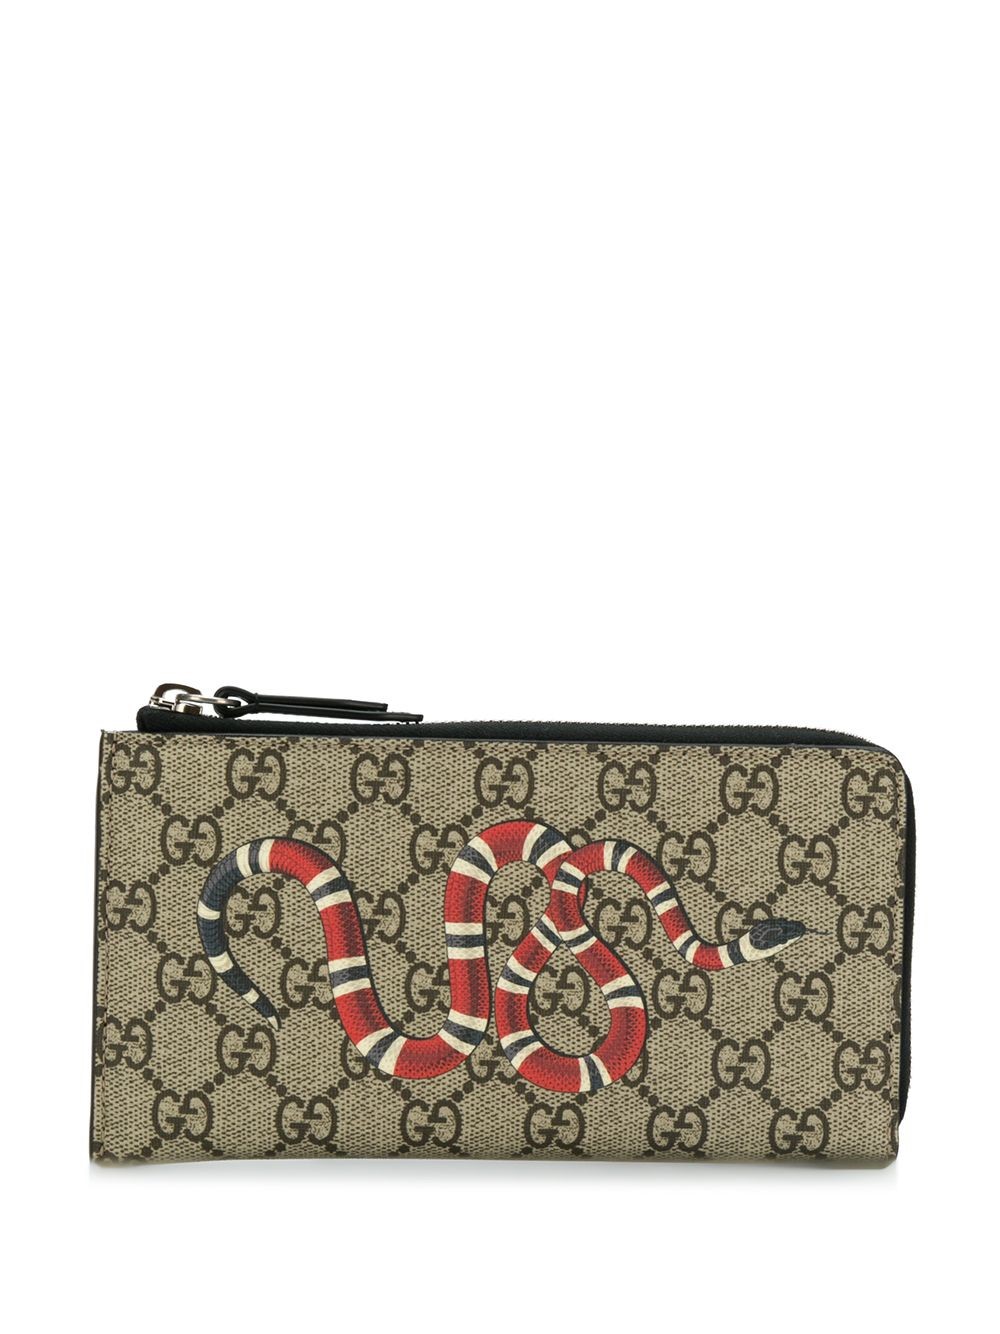 gucci SNAKE WALLET available on www.waterandnature.org - 29225